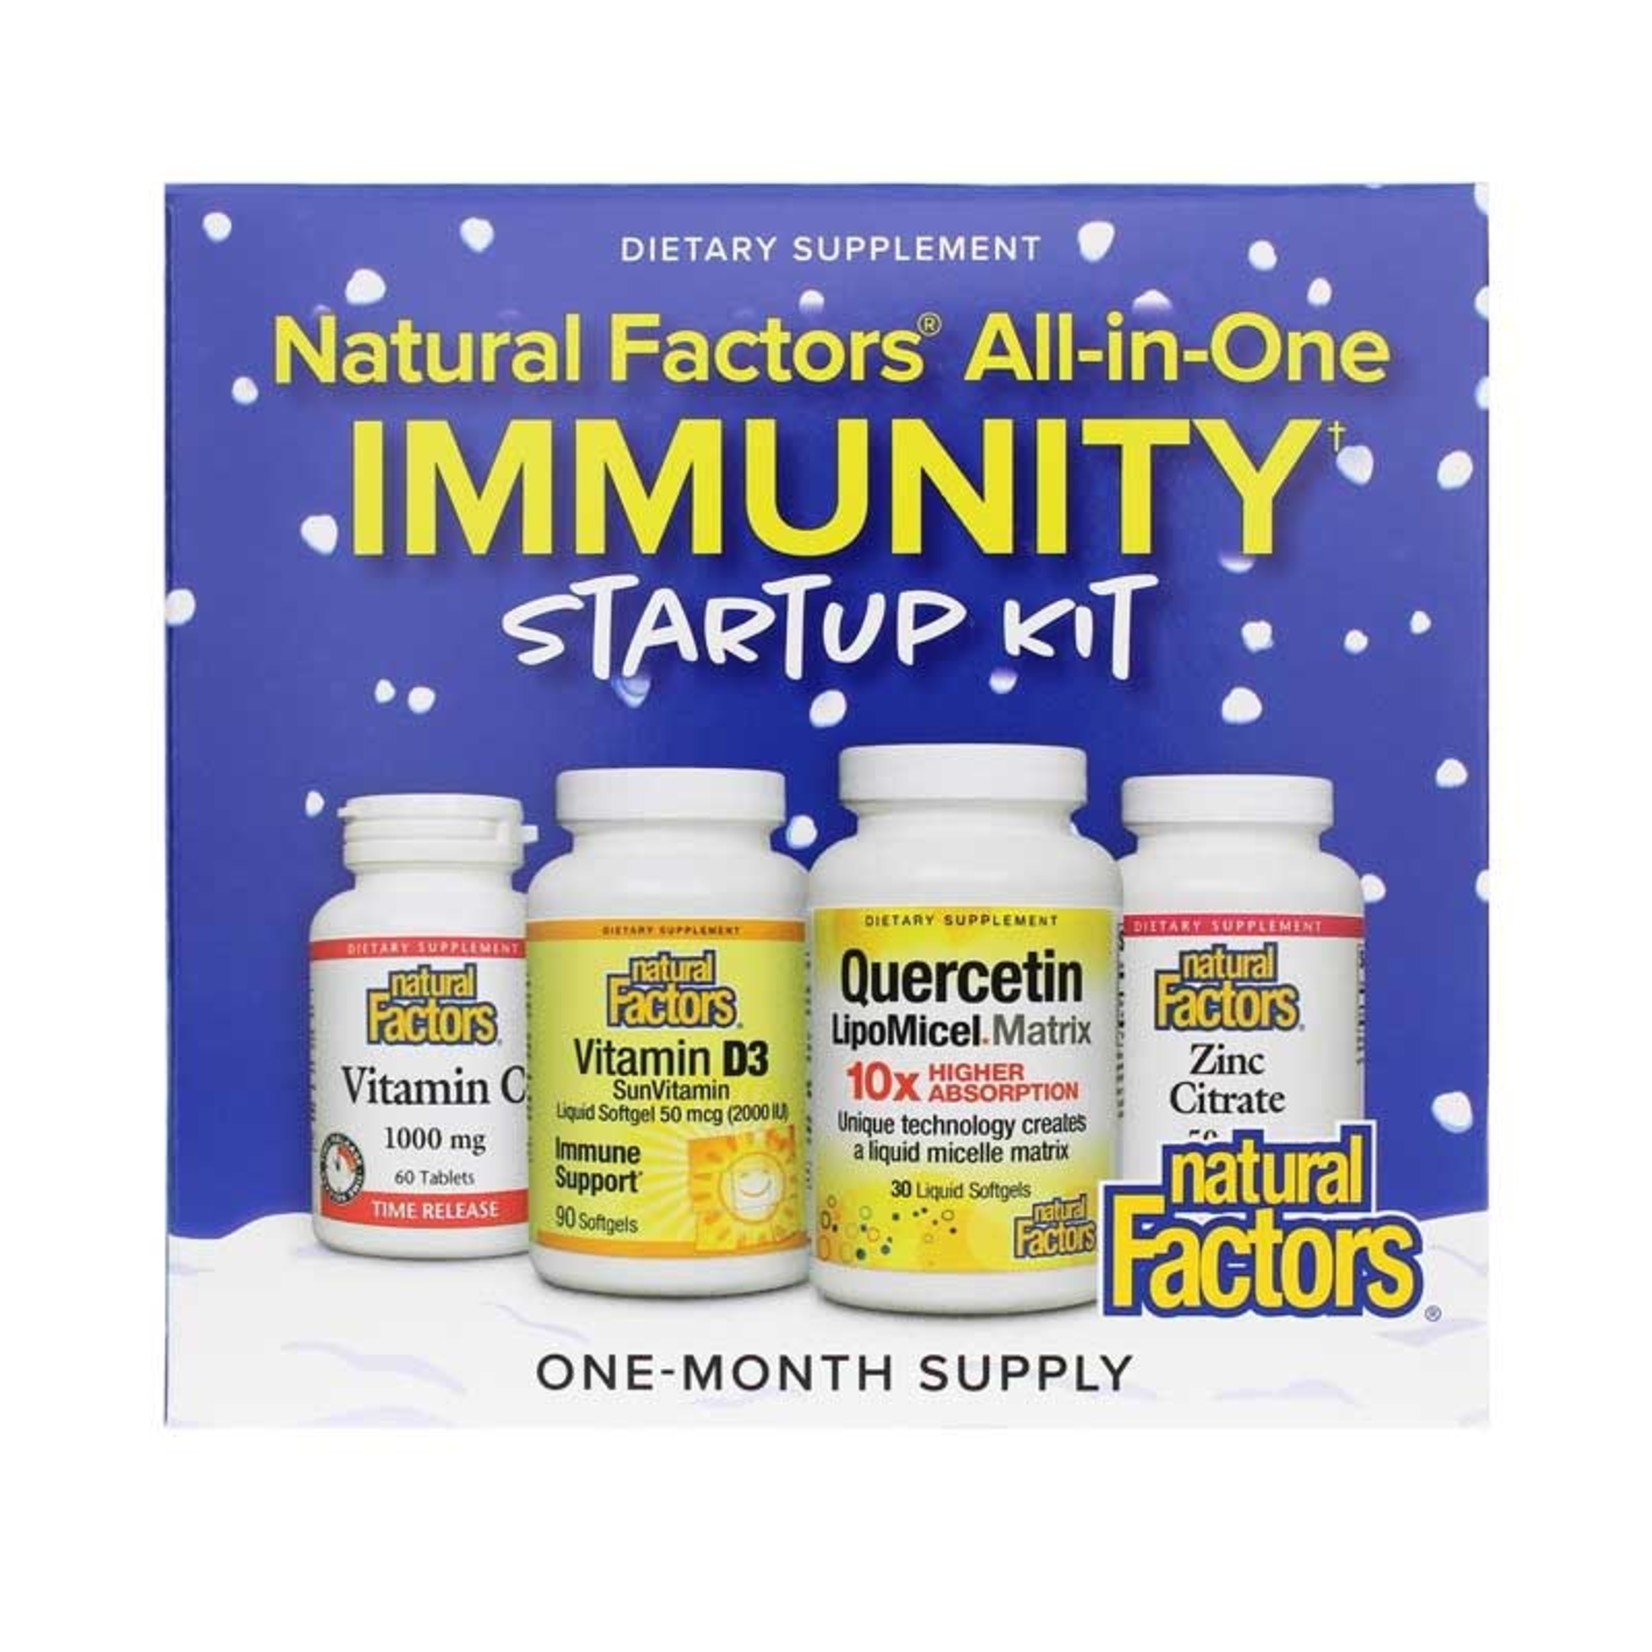 Natural Factors Natural Factors All-in-One Immunity Start Up Kit